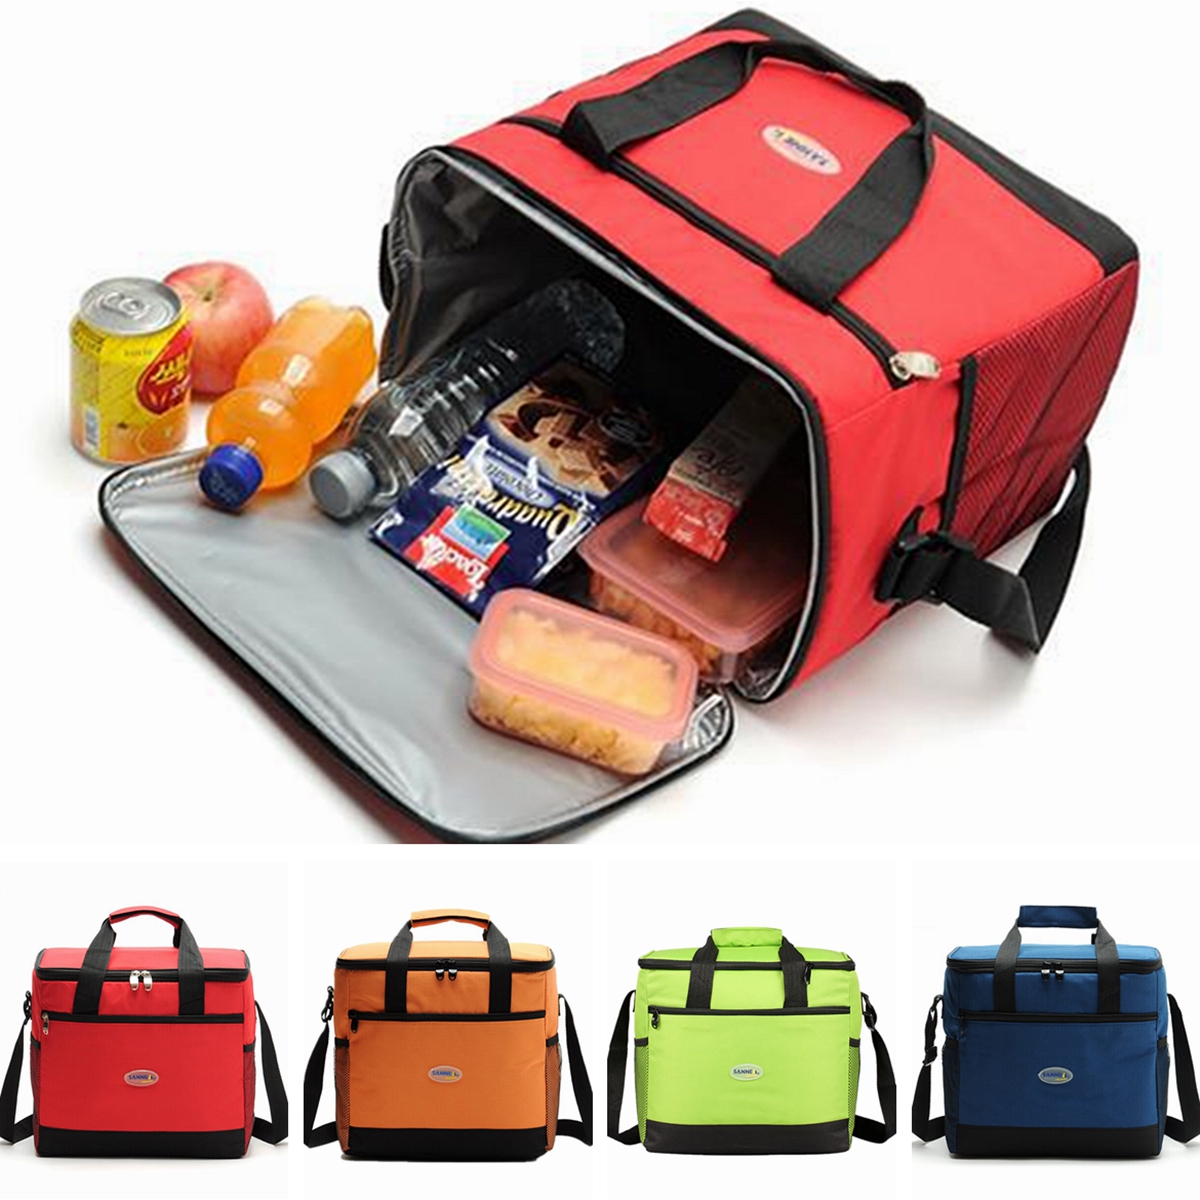 Large-Insulated-Cooler-Cool-Bag-Outdoor-Camping-Picnic-Lunch-Shoulder-Hand-Bag-1186956-1